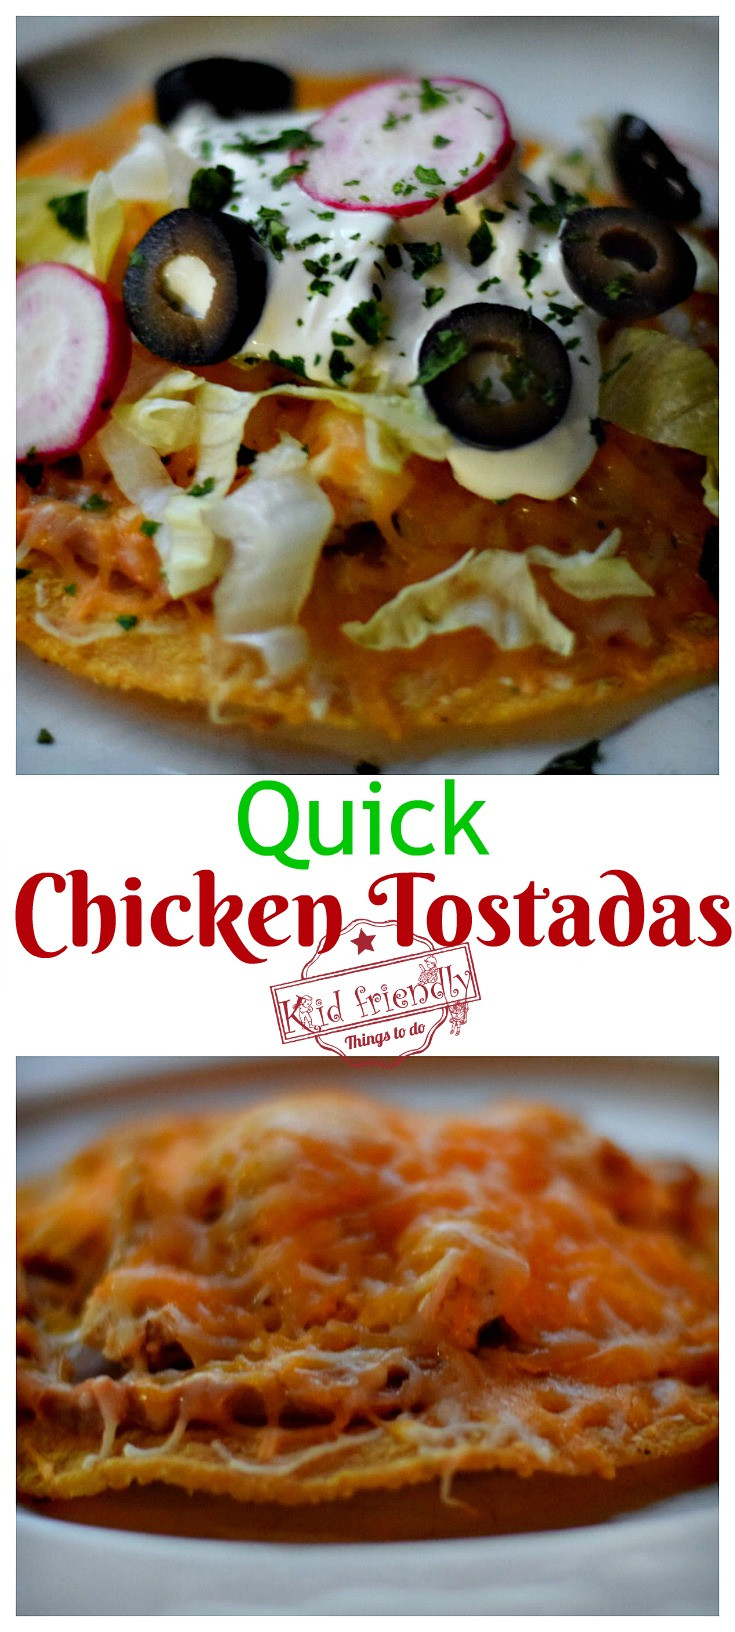 Quick And Easy Mexican Recipes
 Quick Chicken Tostadas An Easy Mexican Food Recipe